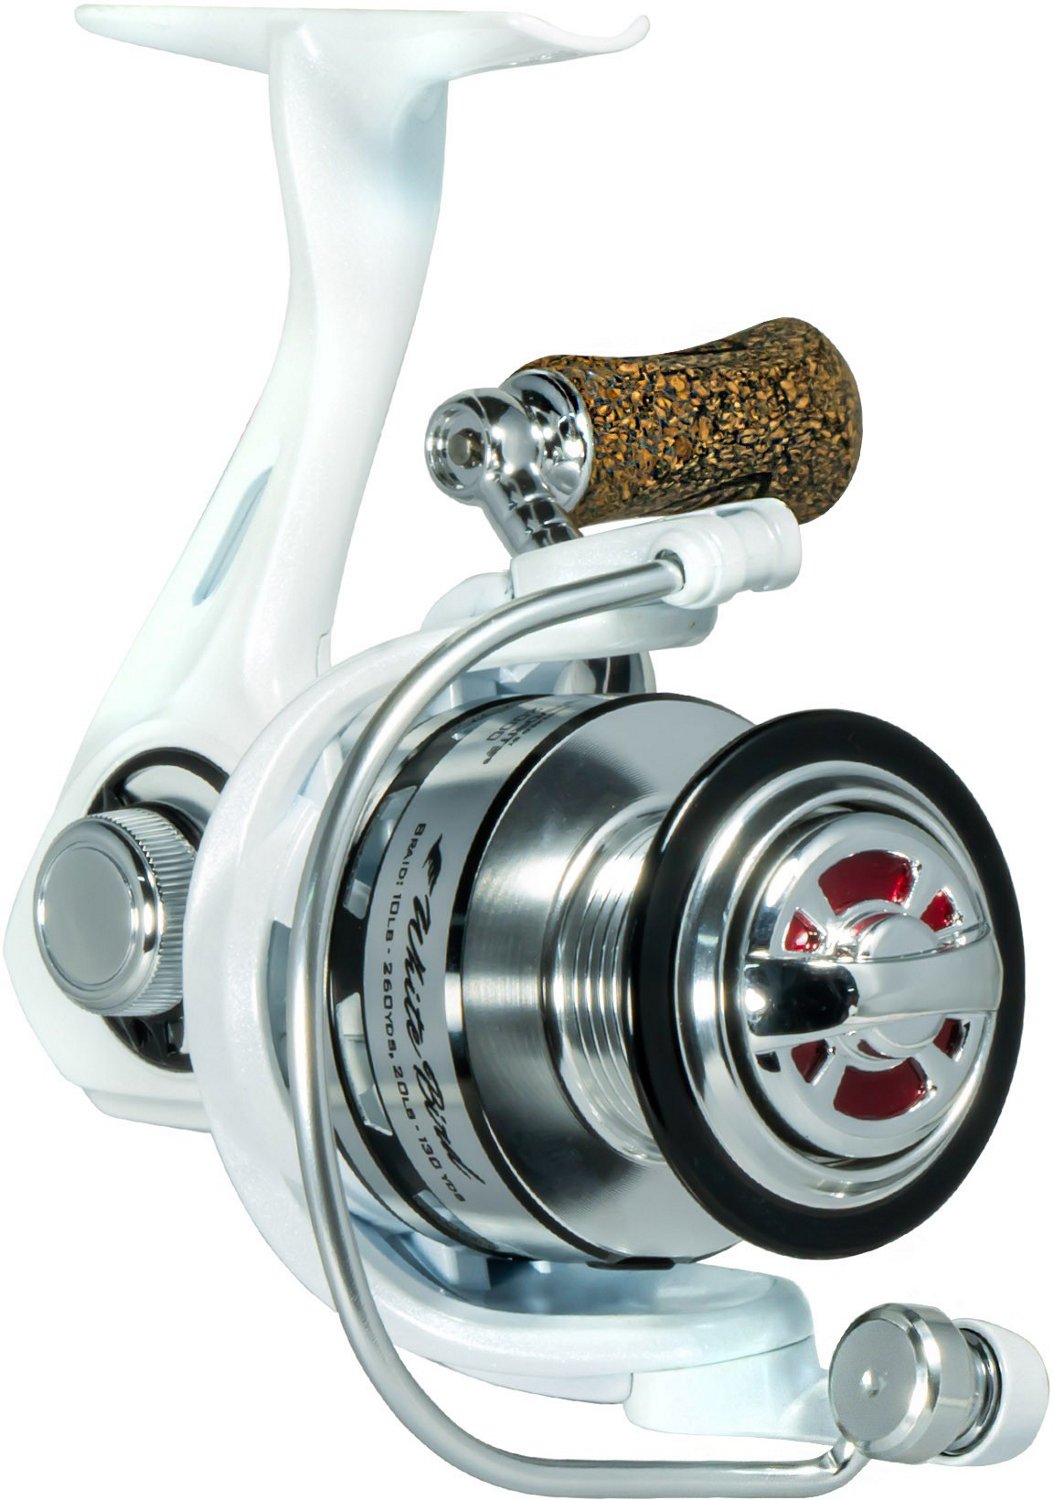 Academy Sports + Outdoors Favorite Fishing White Bird Spinning